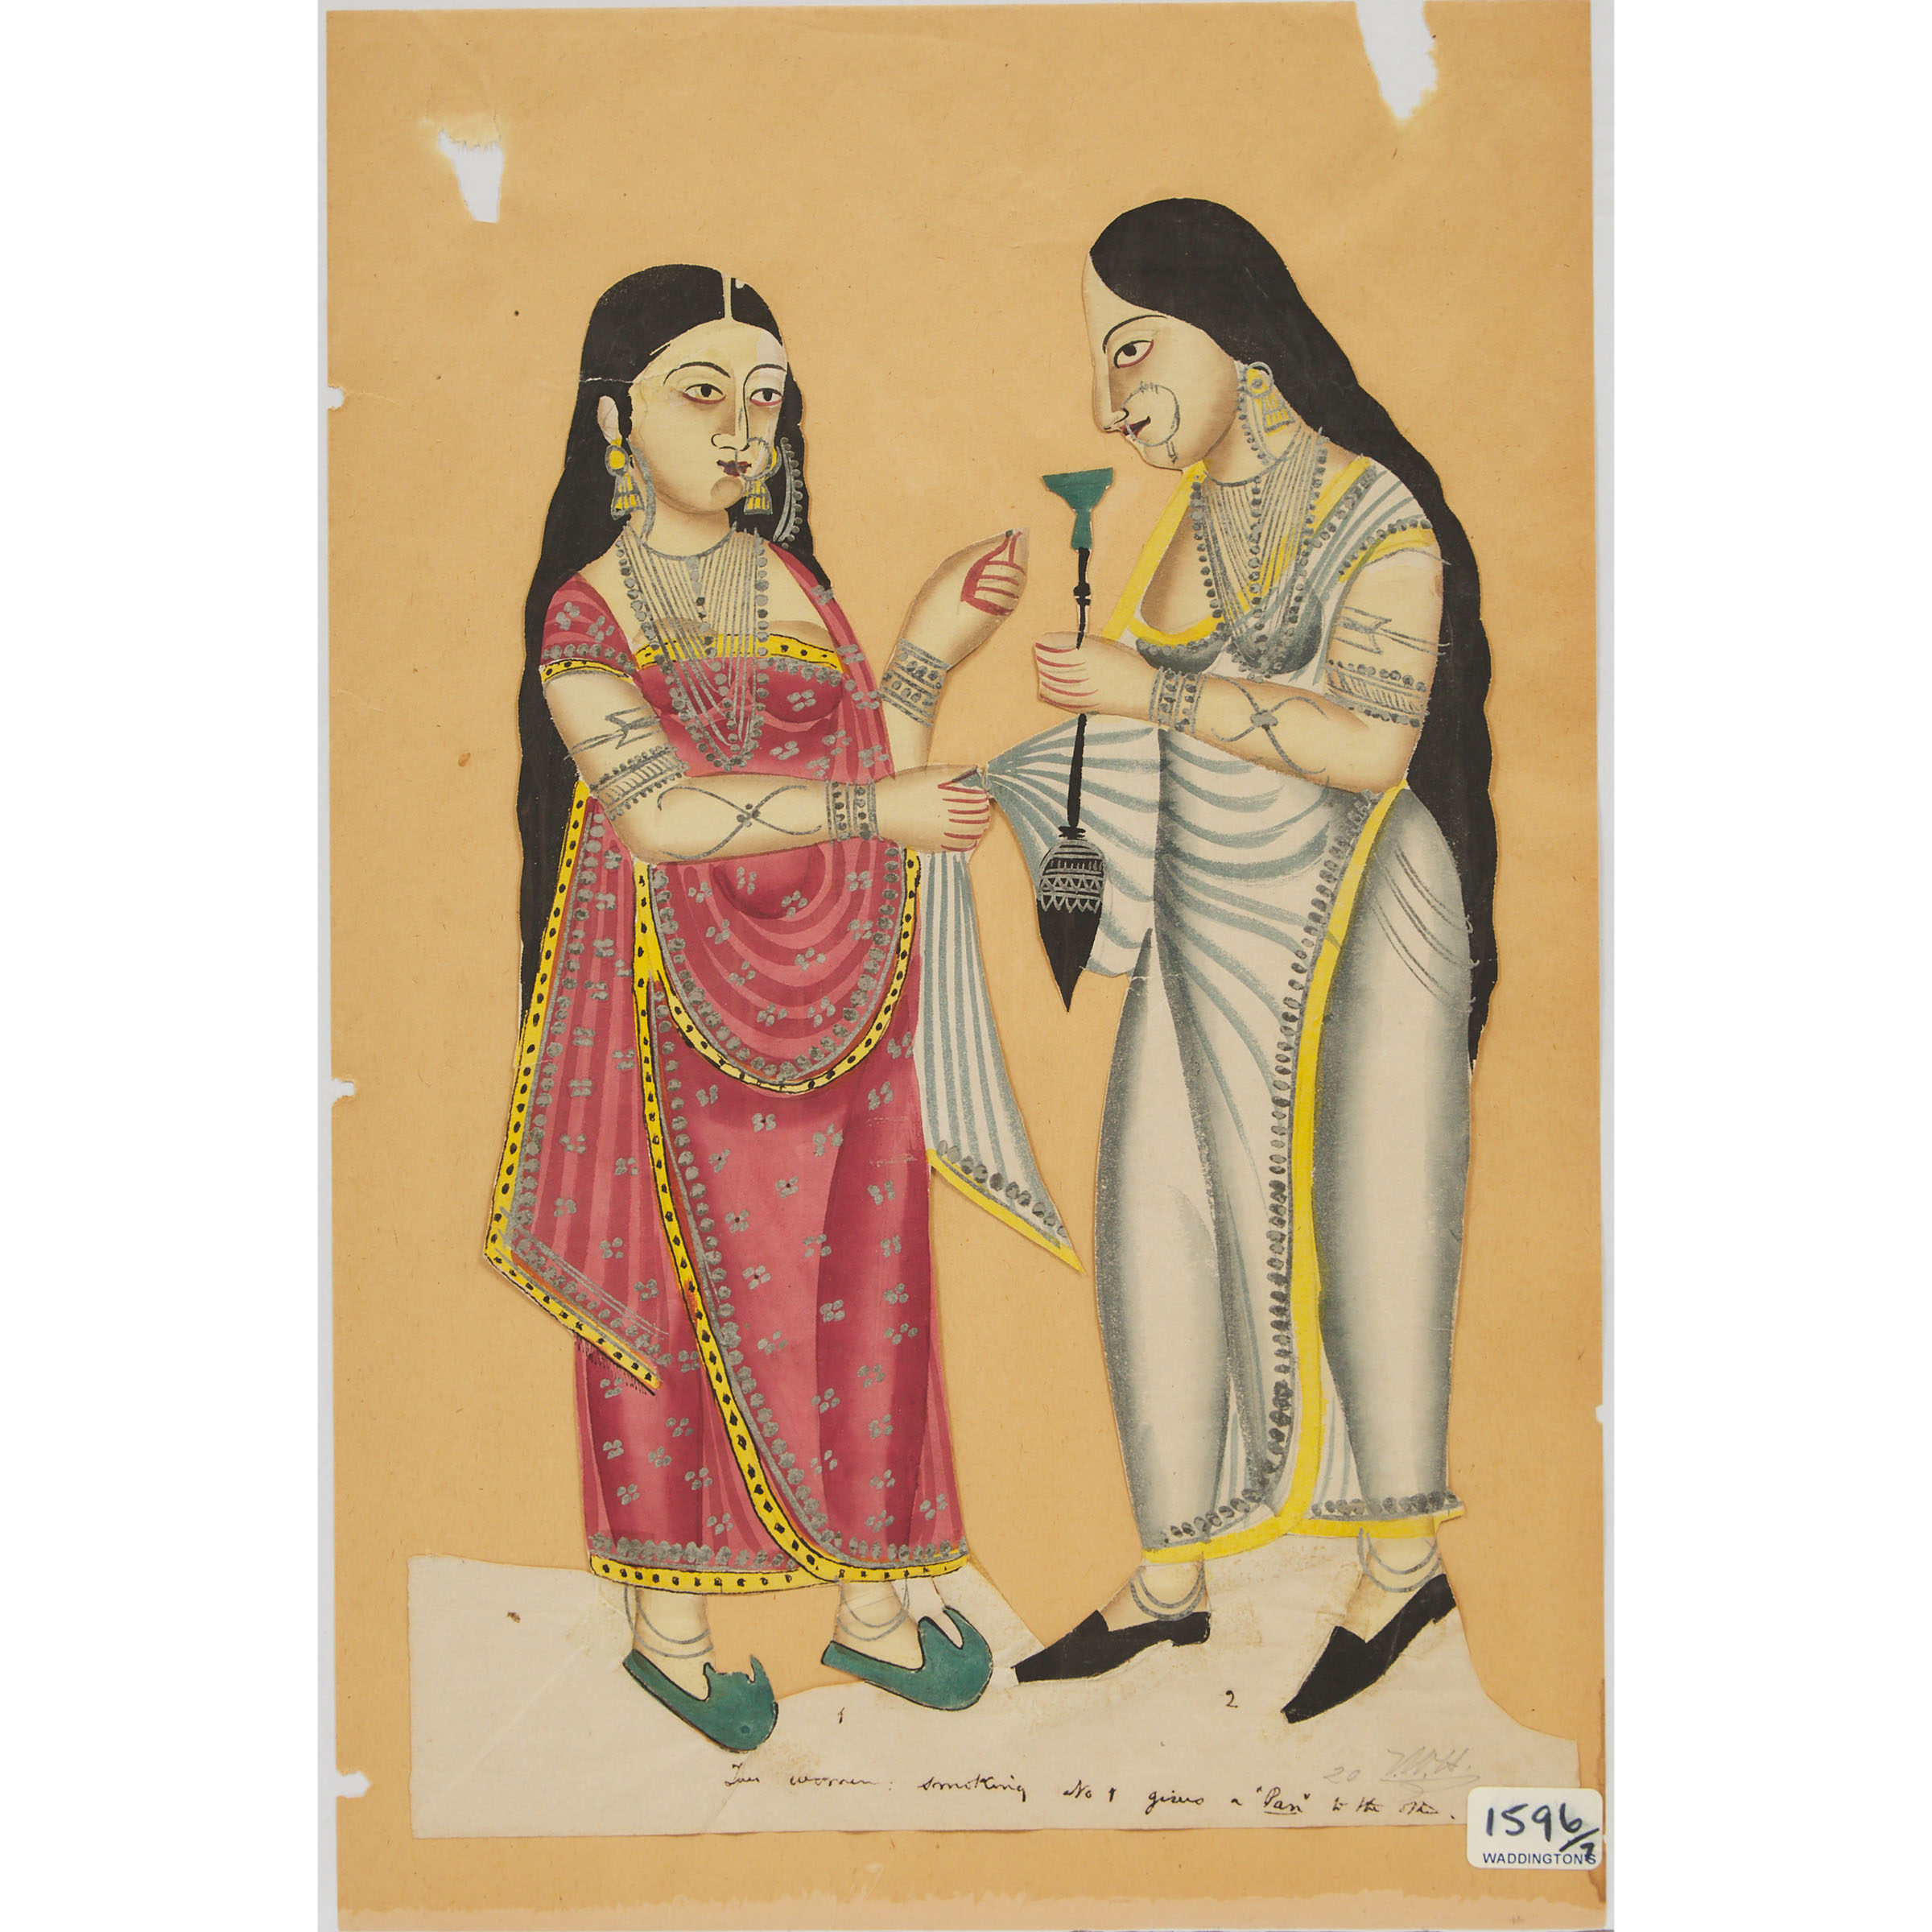 A Kalighat Painting of Two Women,